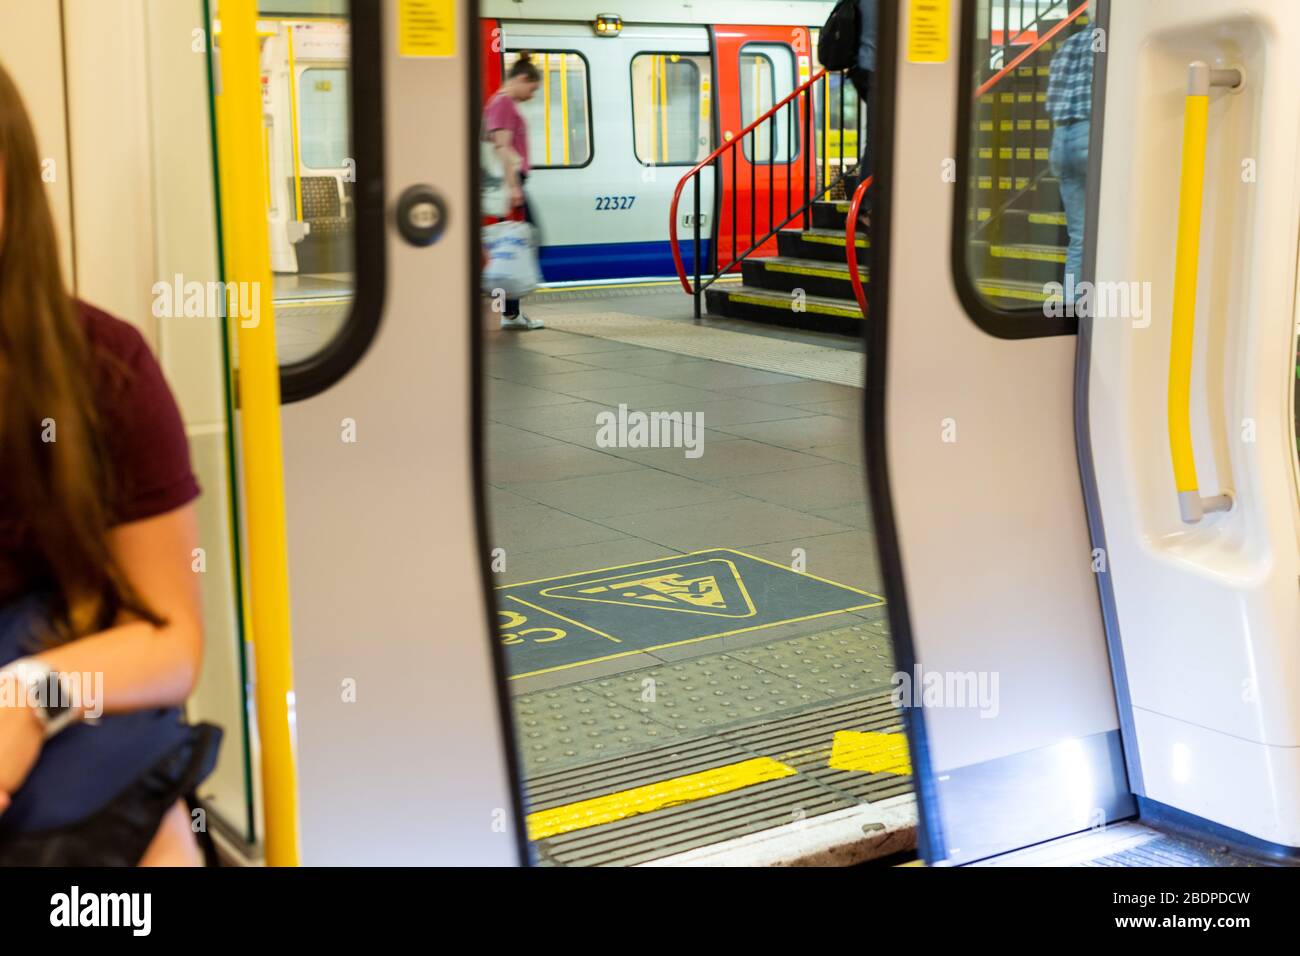 'Mind the Gap.' A common and frequent message heard on the London Underground. Londoners use an extensive integrated transit system to get around. Stock Photo